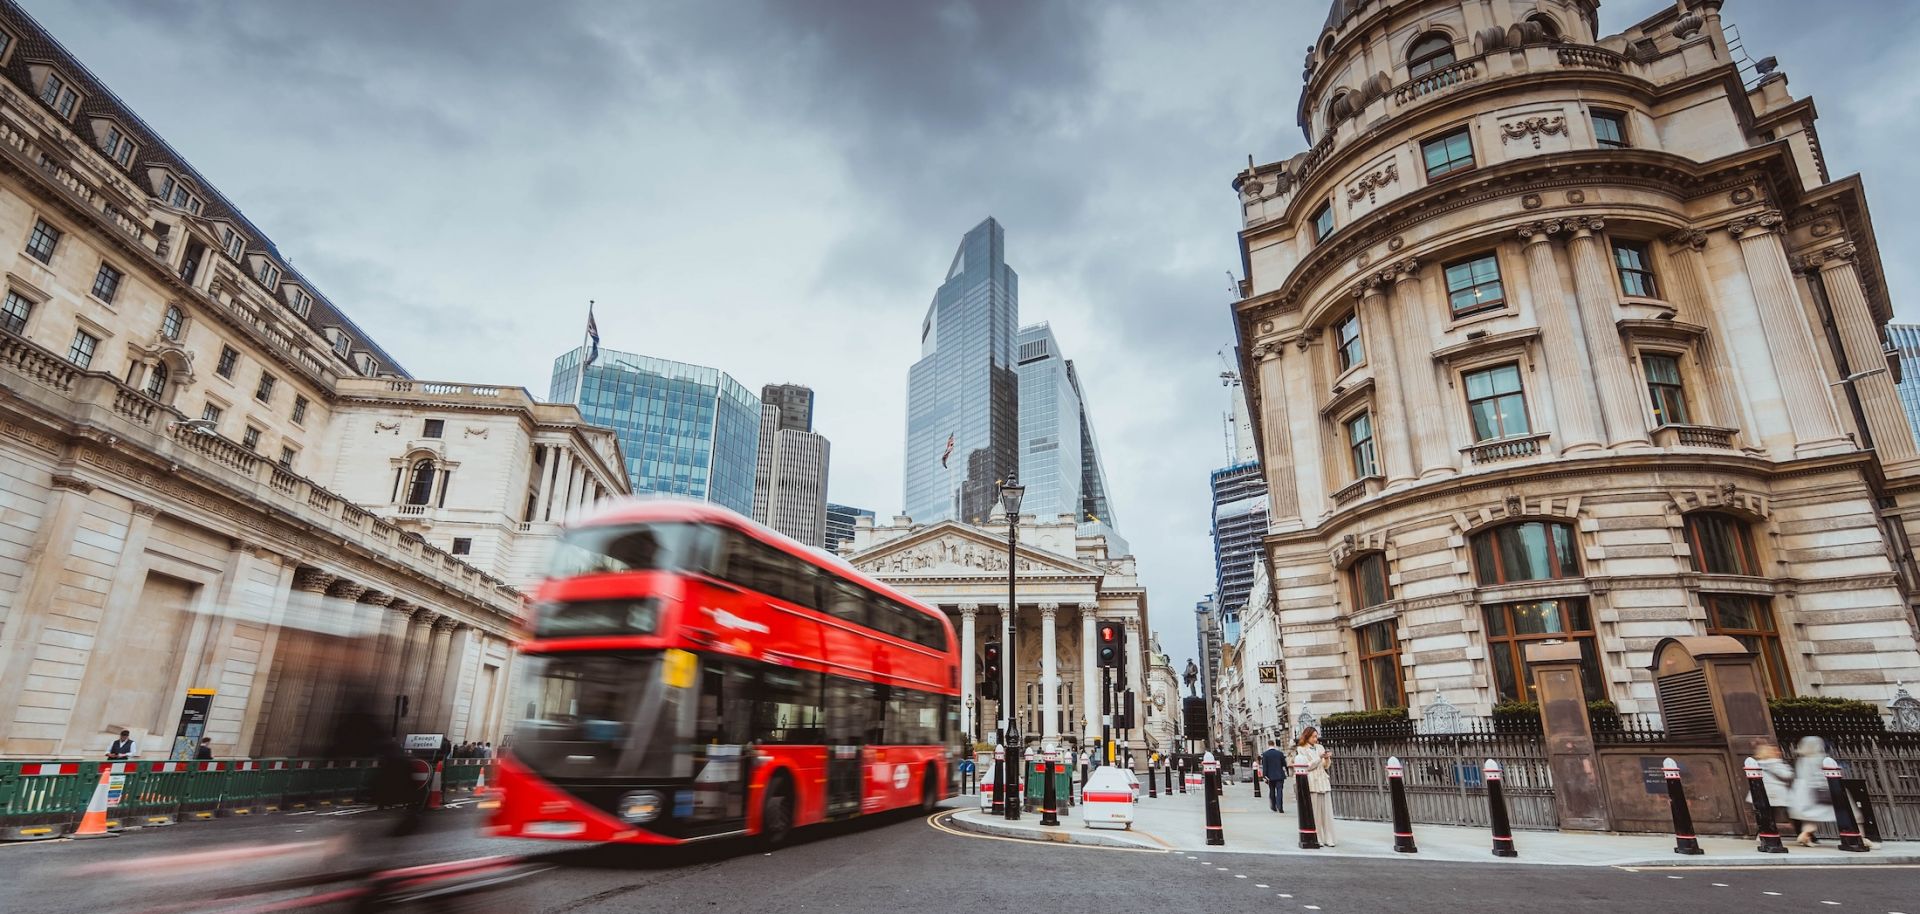 A stock photo shows a street scene in the financial district of London. 